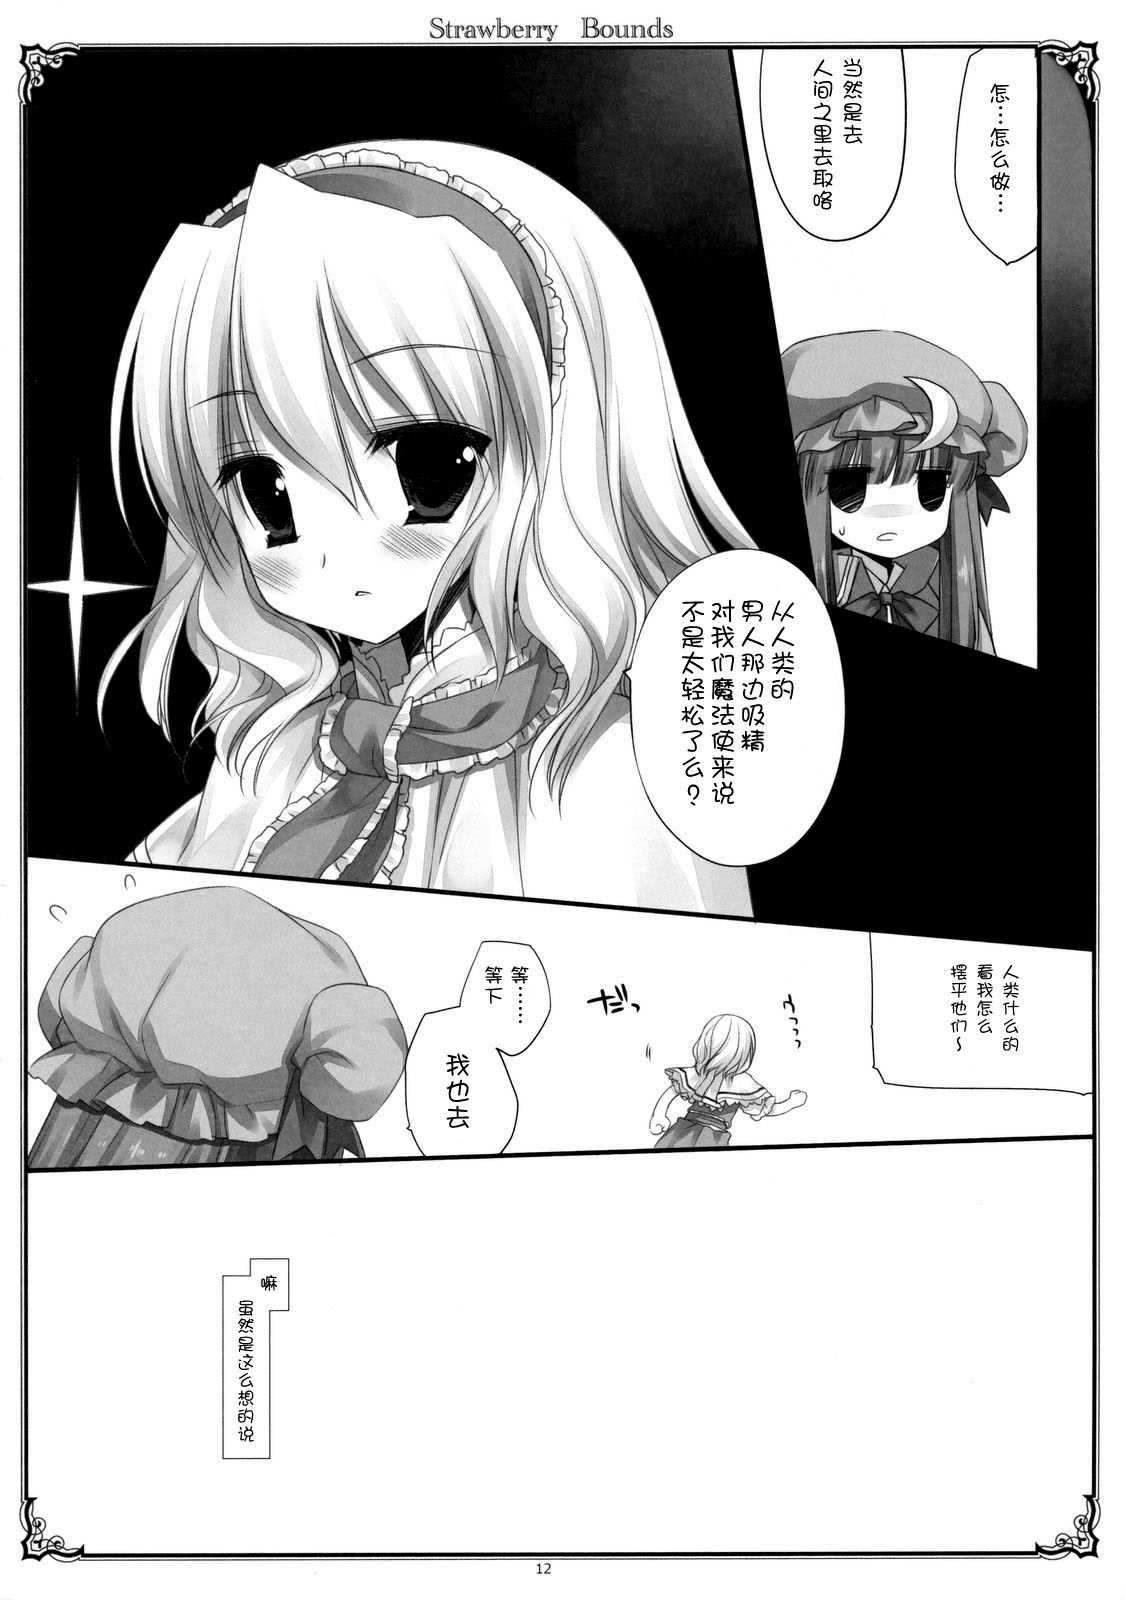 (C79) [D.N.A.Lab. (Miyasu Risa)] Strawberry Bounds (Touhou Project) [Chinese] (C79) (同人誌) [D.N.A.Lab. (ミヤスリサ)] Strawberry Bounds (東方) [空気系★汉化]